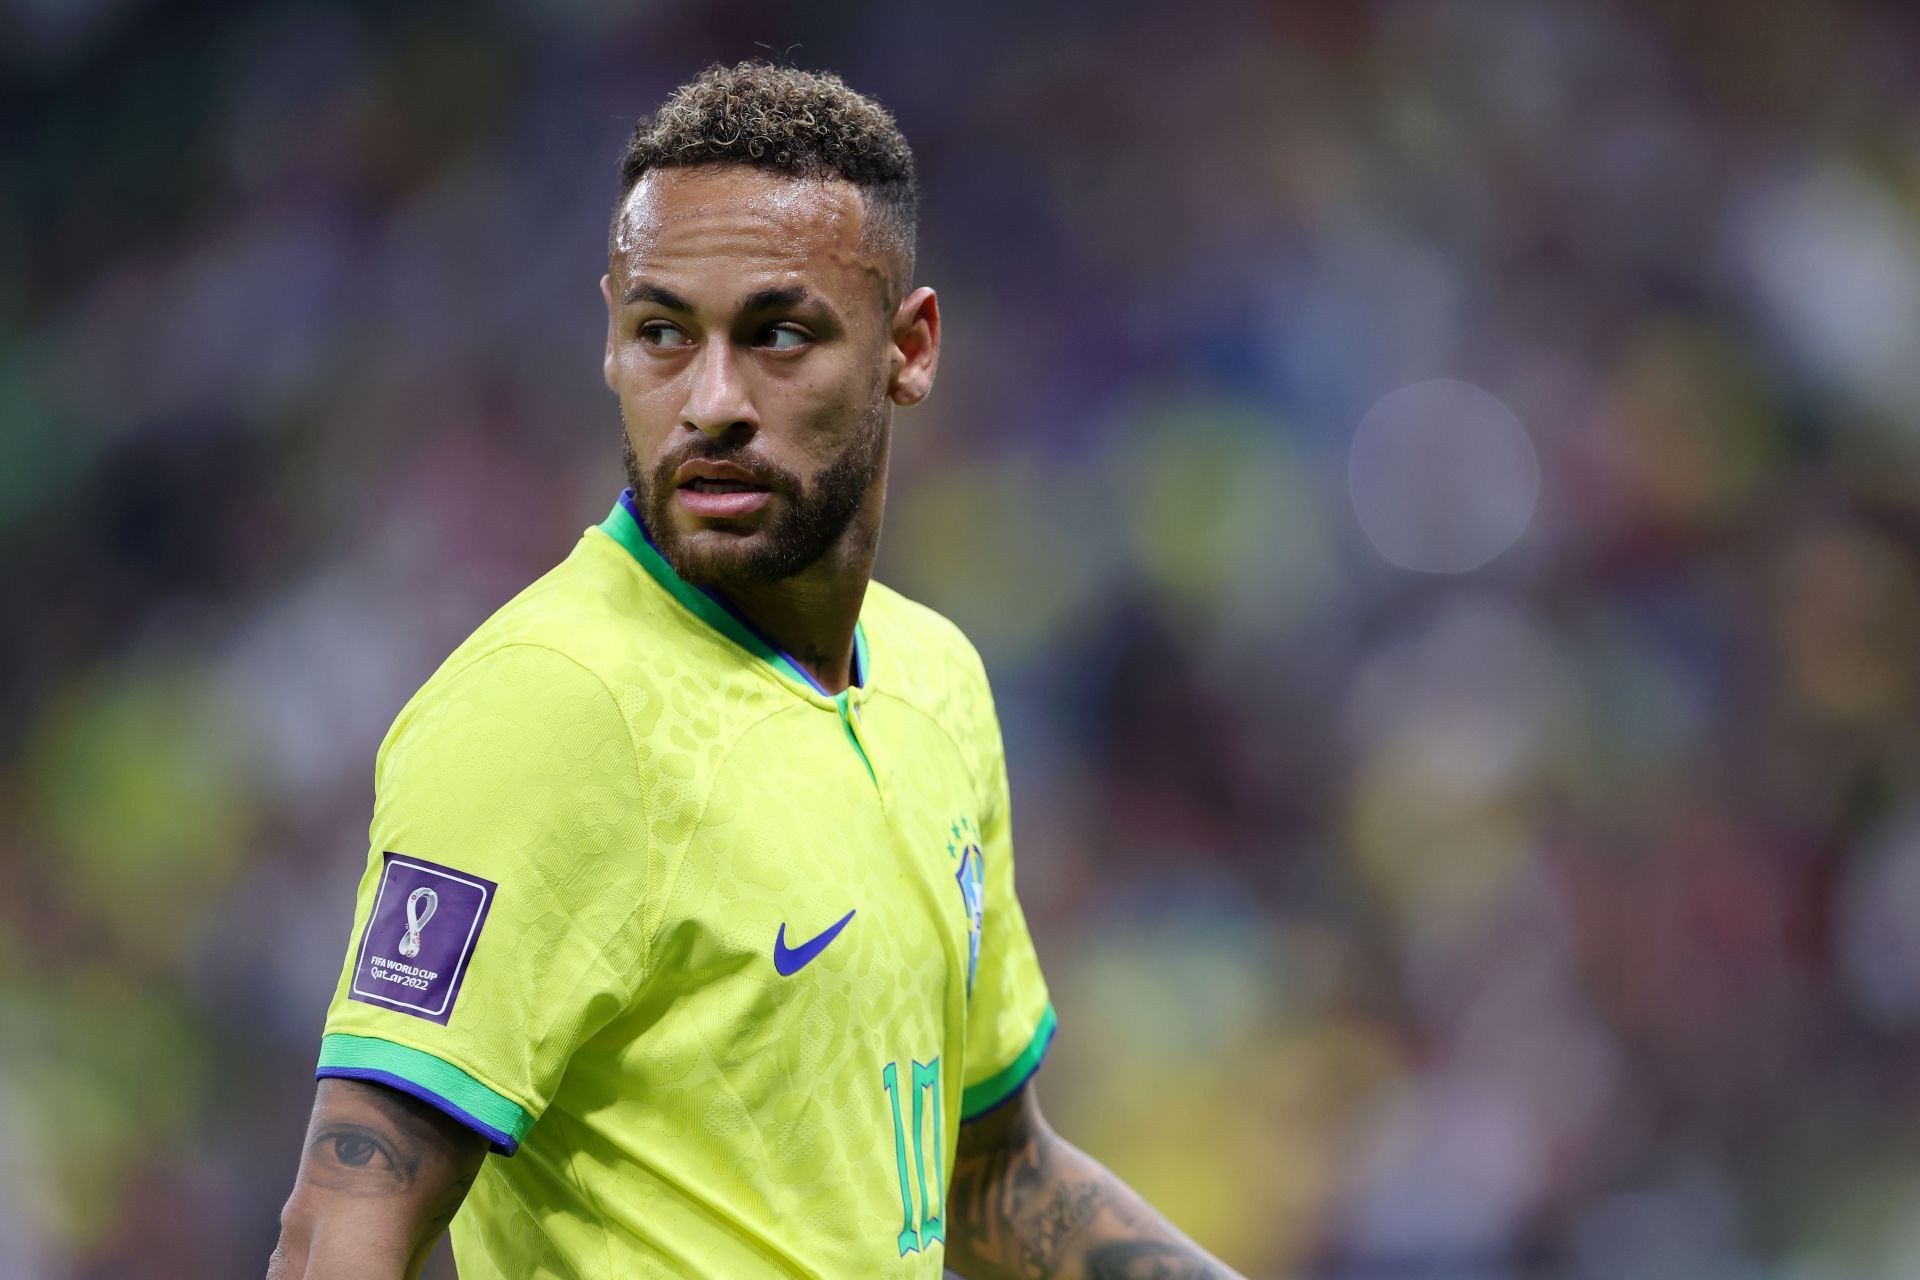 Neymar has been urged to seal his legacy